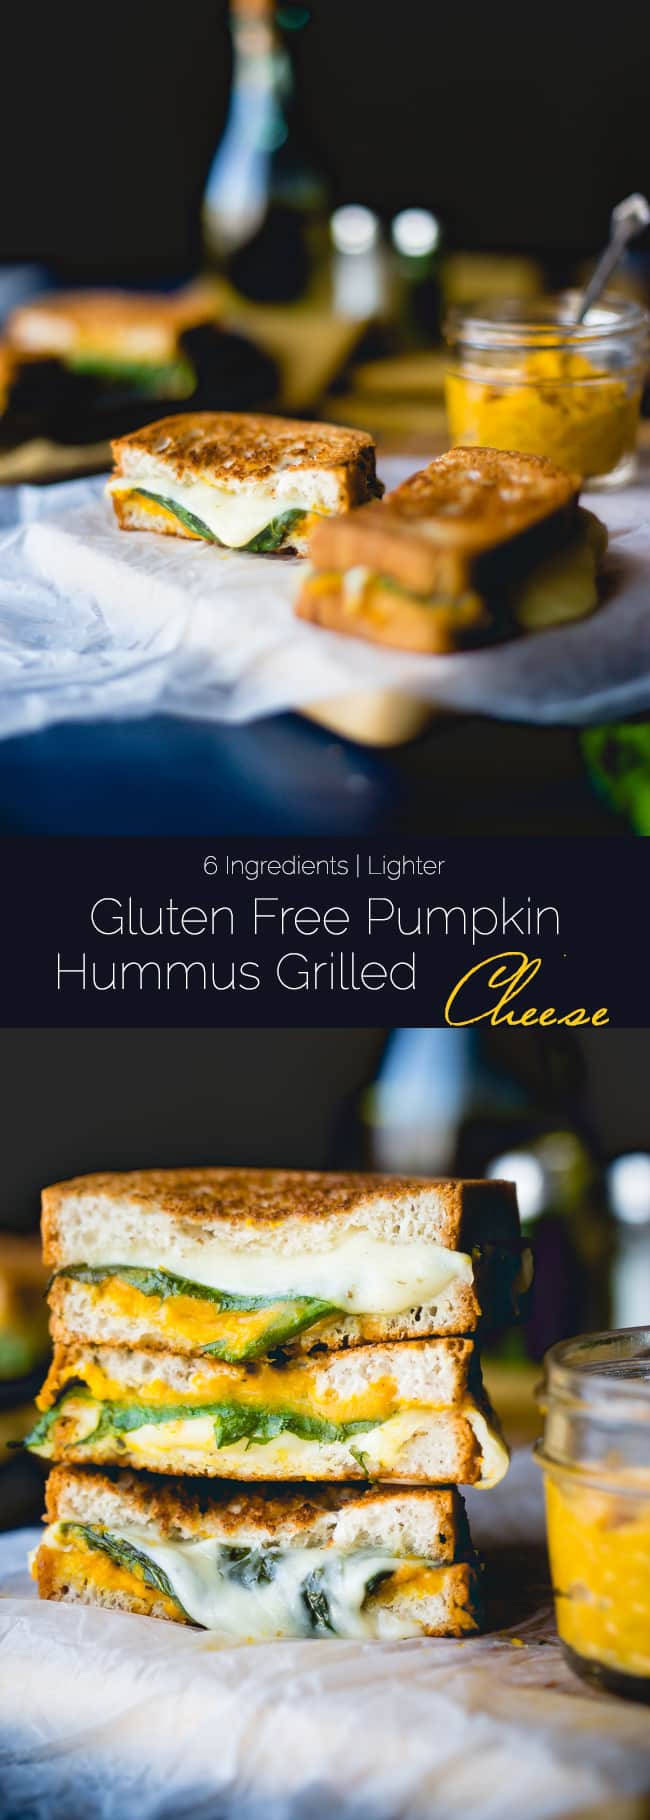 Gluten Free Pumpkin Hummus Grilled Cheese - This gluten free grilled cheese sandwich has the creamy, flavor of pumpkin! It's a healthier version of the classic sandwich that's perfect for fall lunches or dinners! | Foodfaithfitness.com | @FoodFaithFit